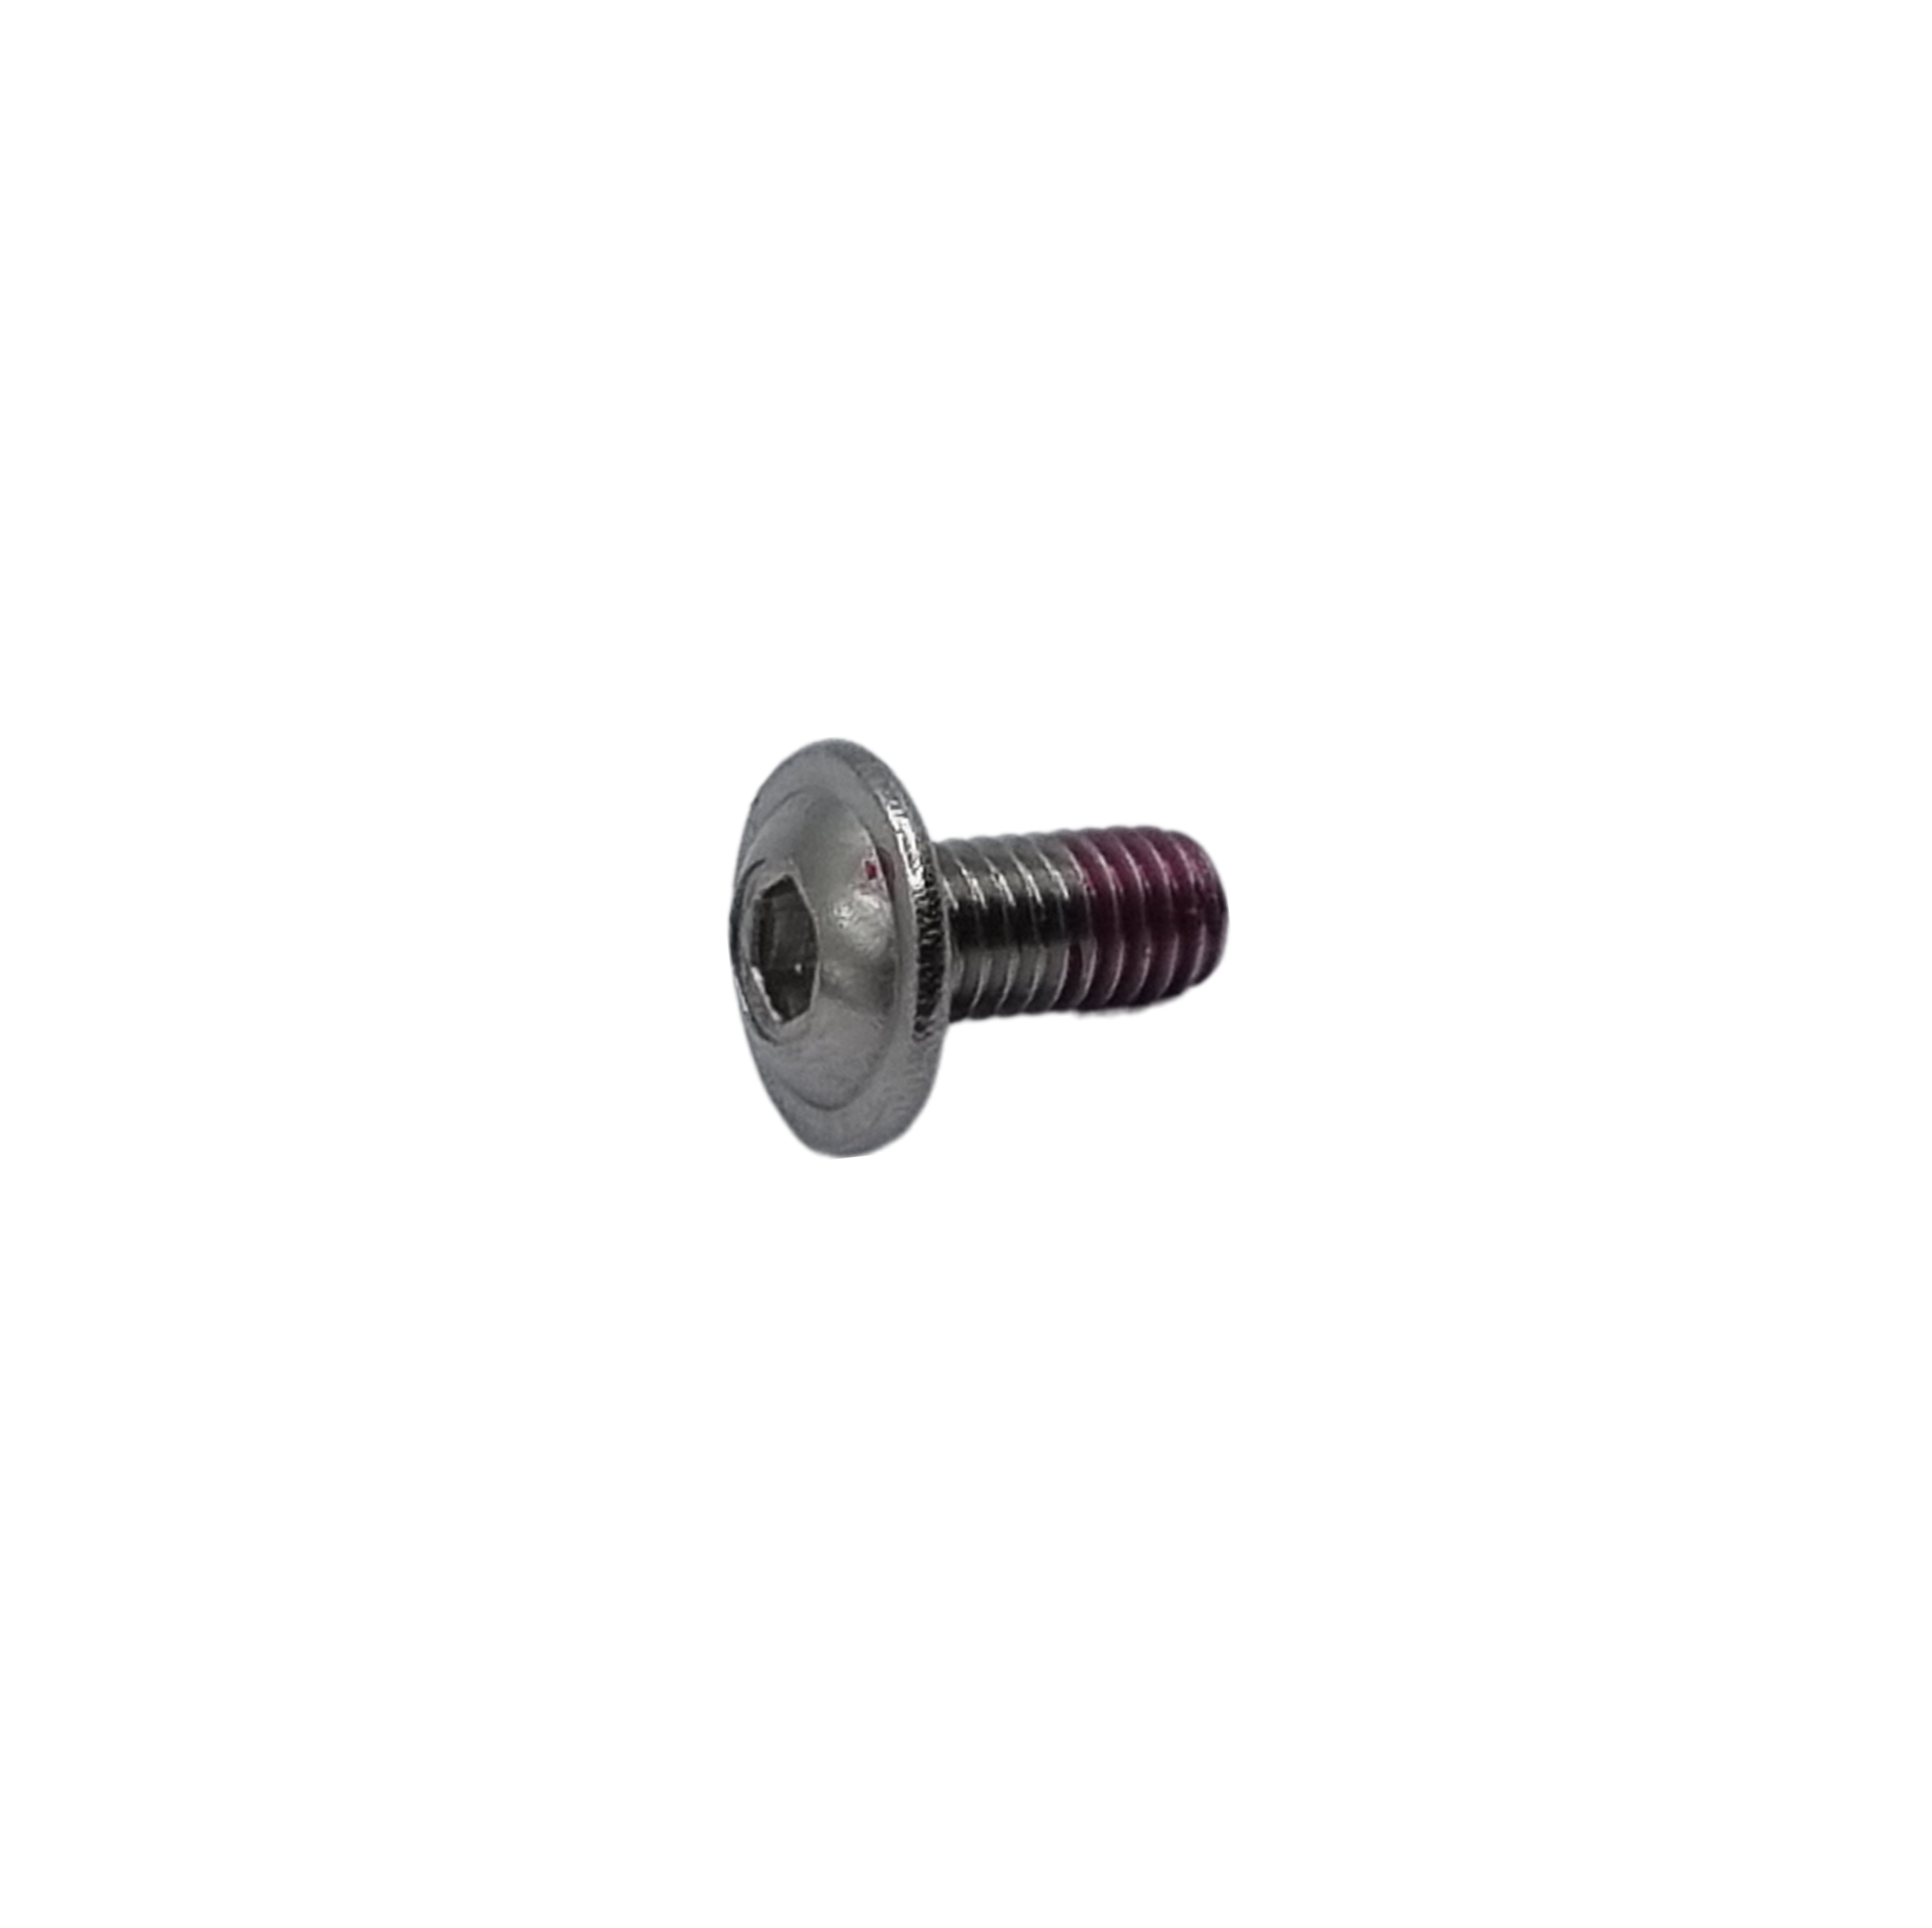 Ebog Designs AAP01 Part 58 - Selector Switch Screw